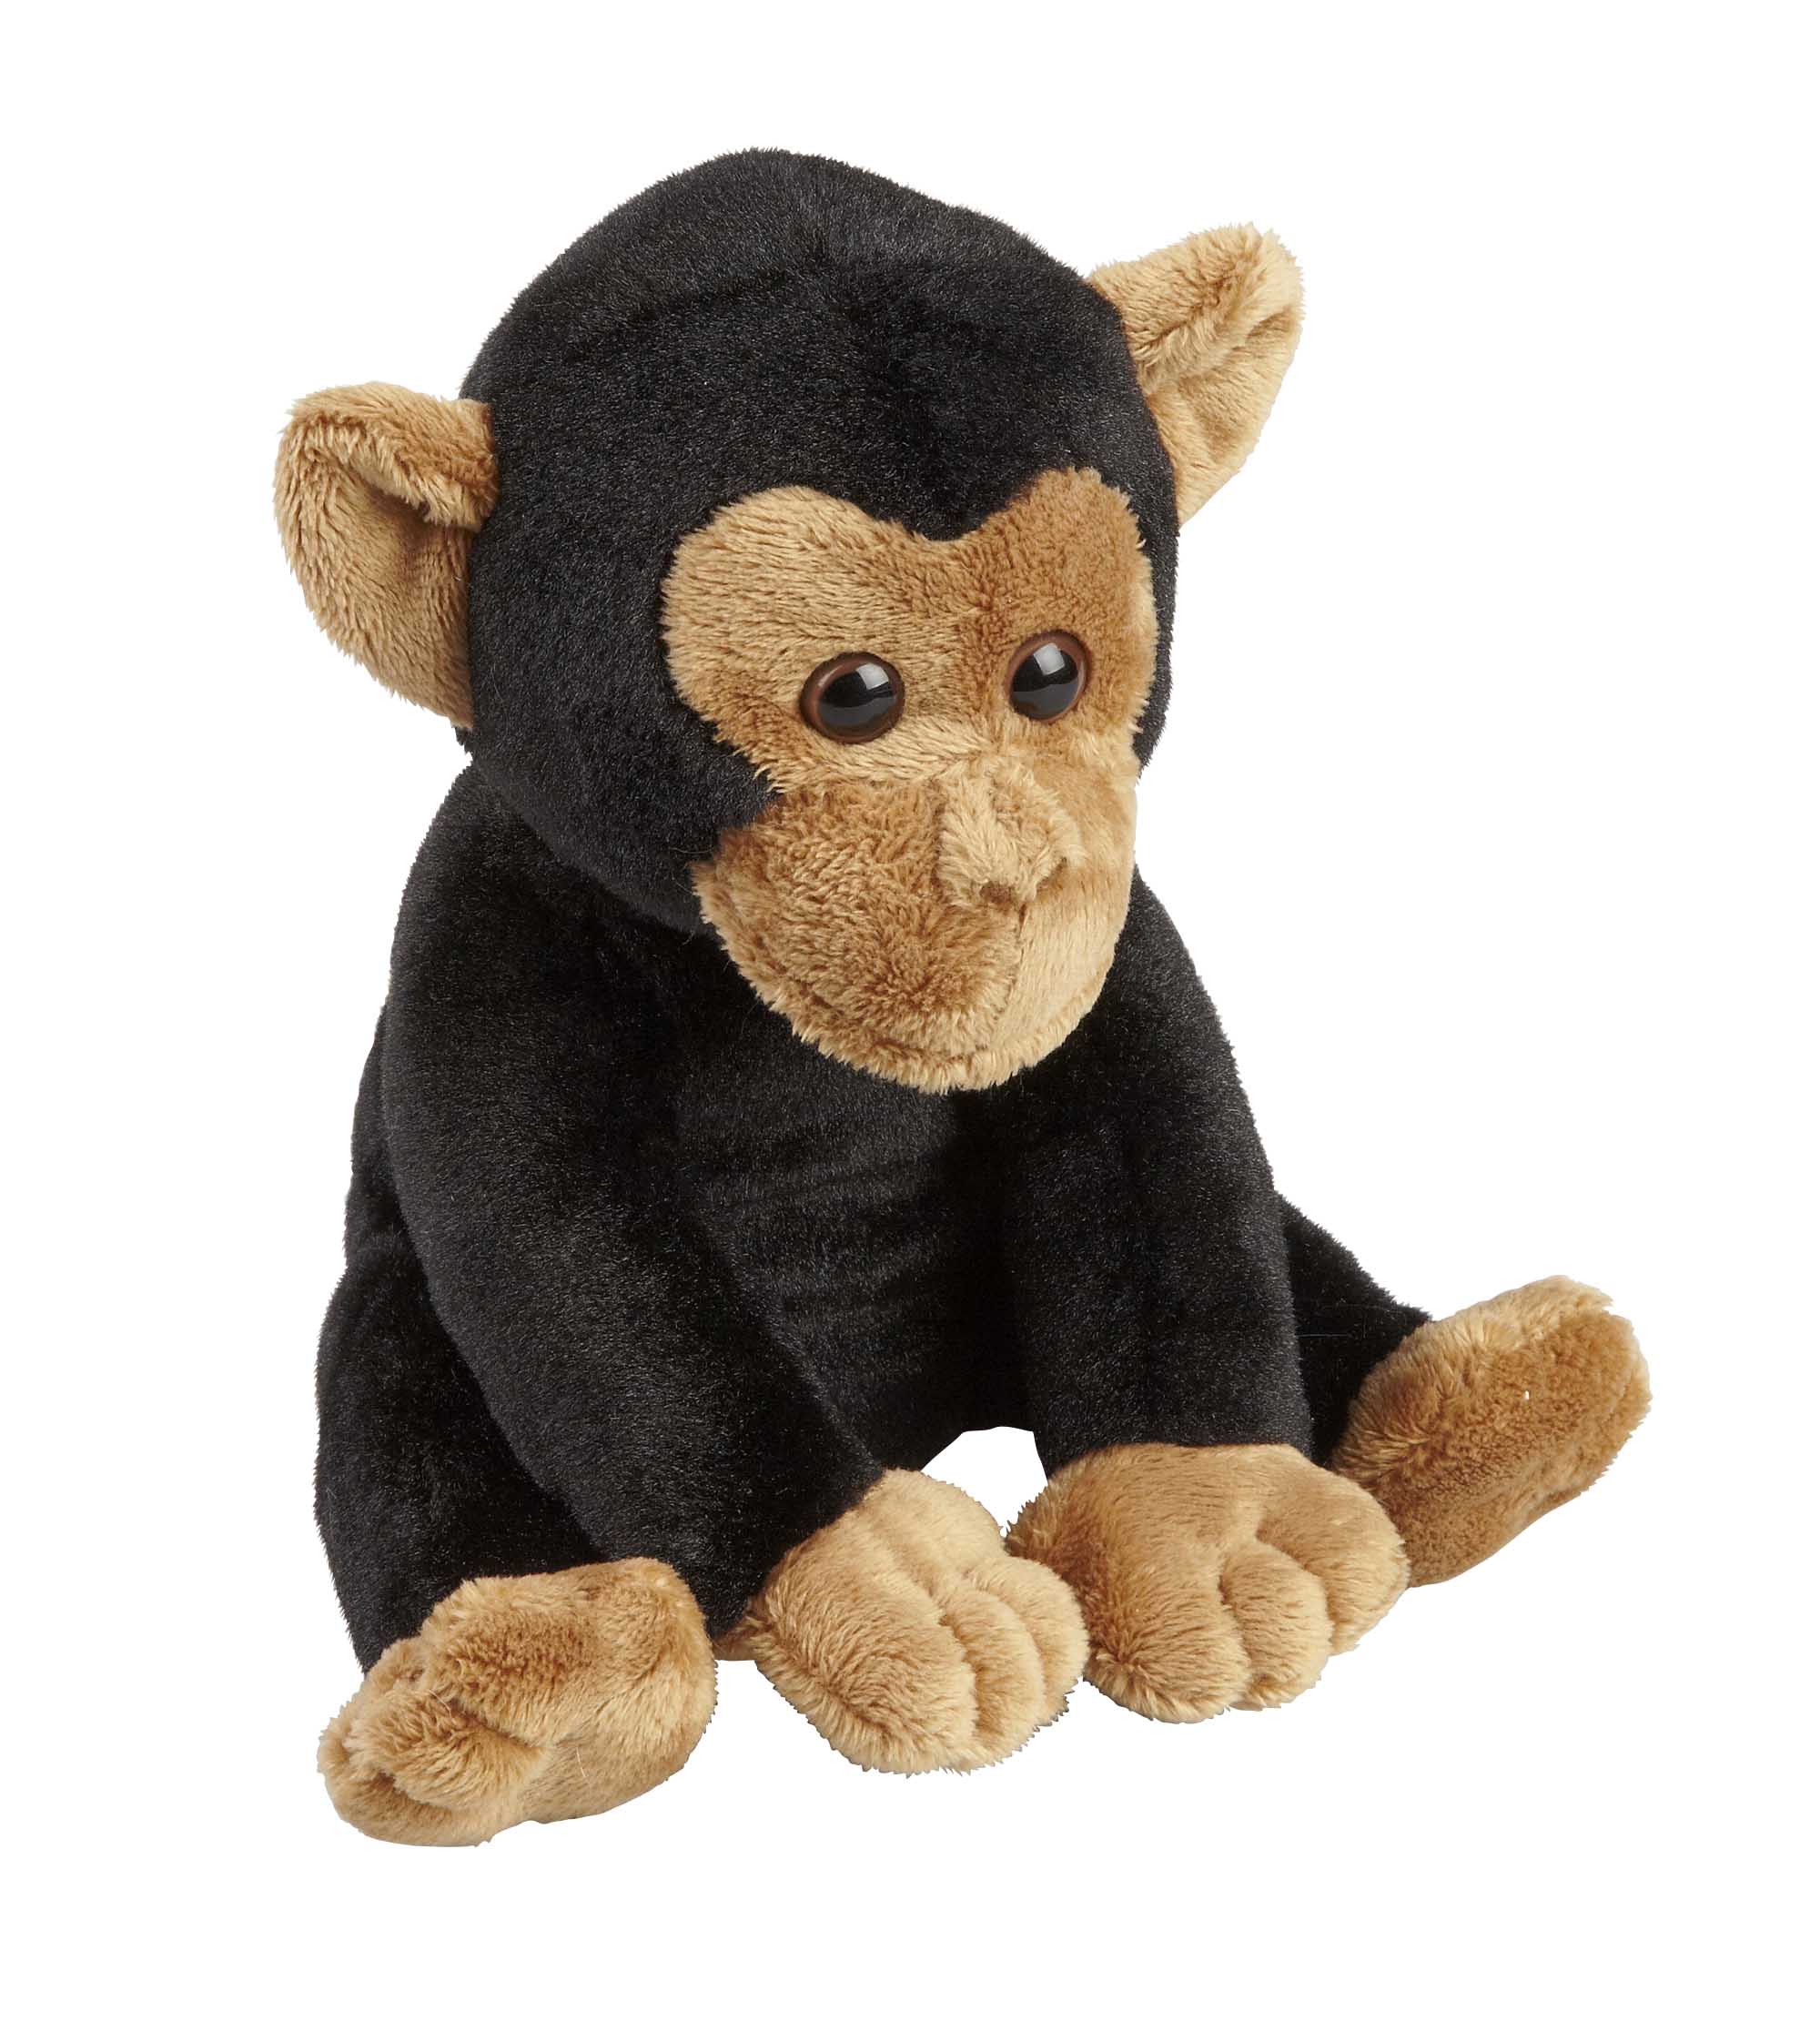 Bespoke Suppliers of Toy Monkey for Museums